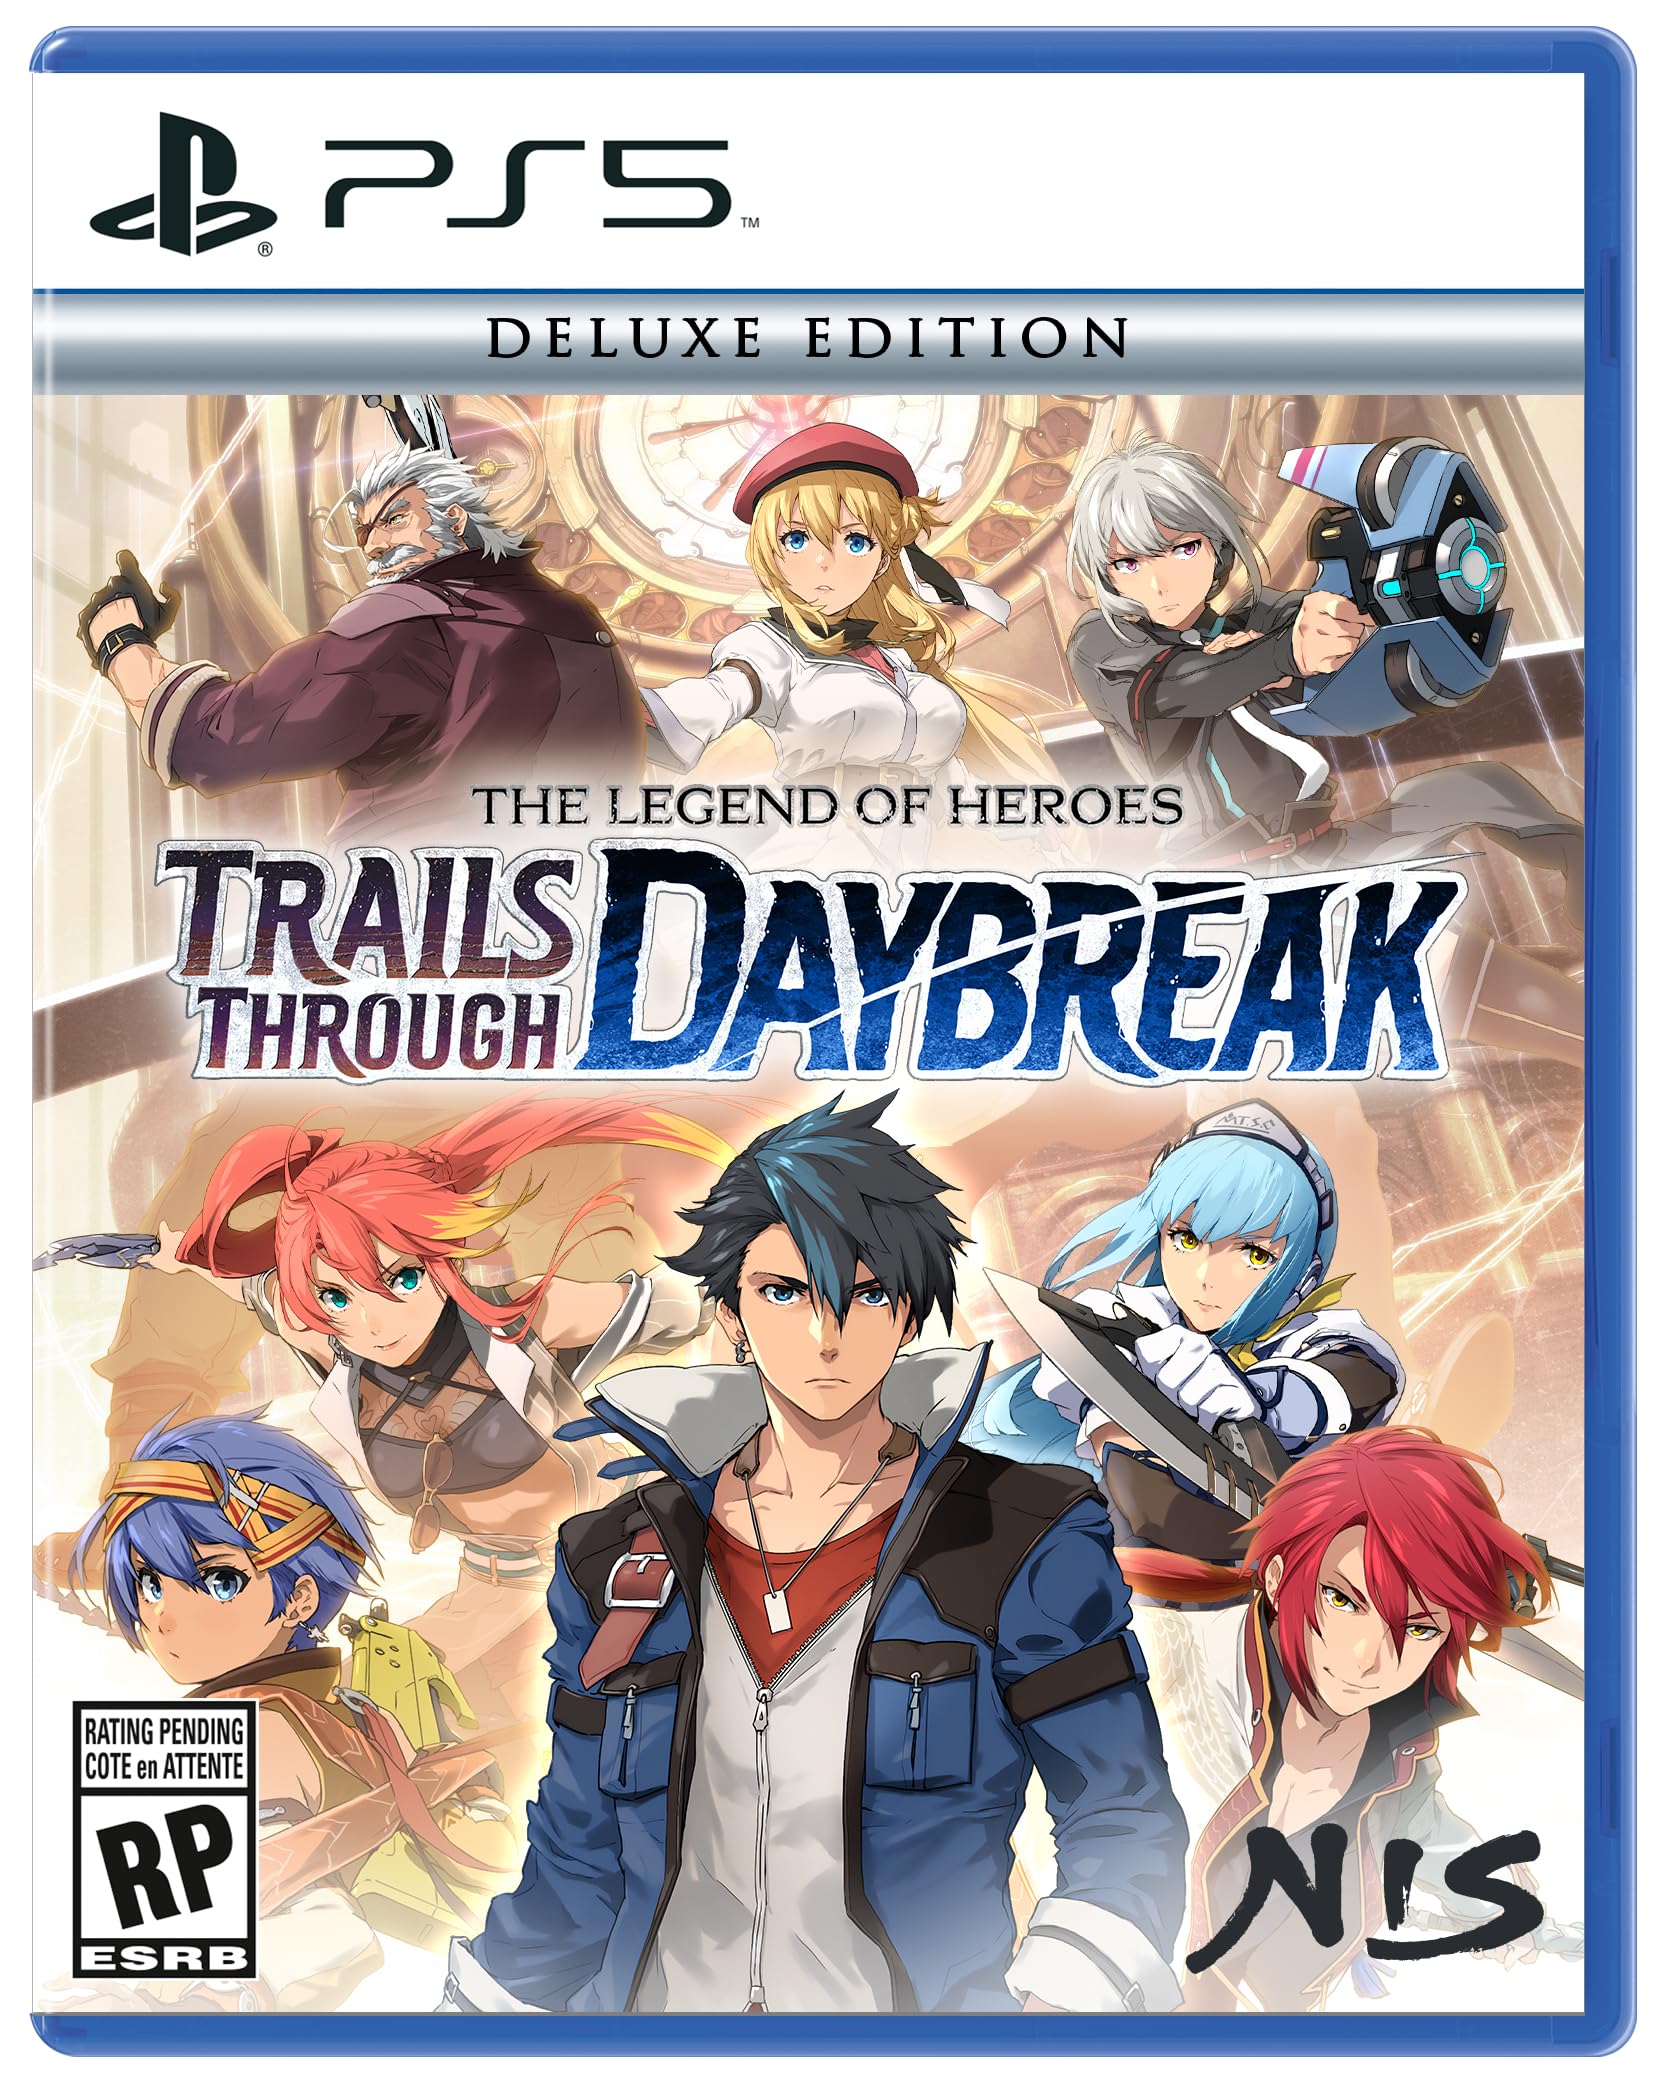 The Legend of Heroes: Trails through Daybreak: Deluxe Edition - (PS5) PlayStation 5 Video Games NIS America   